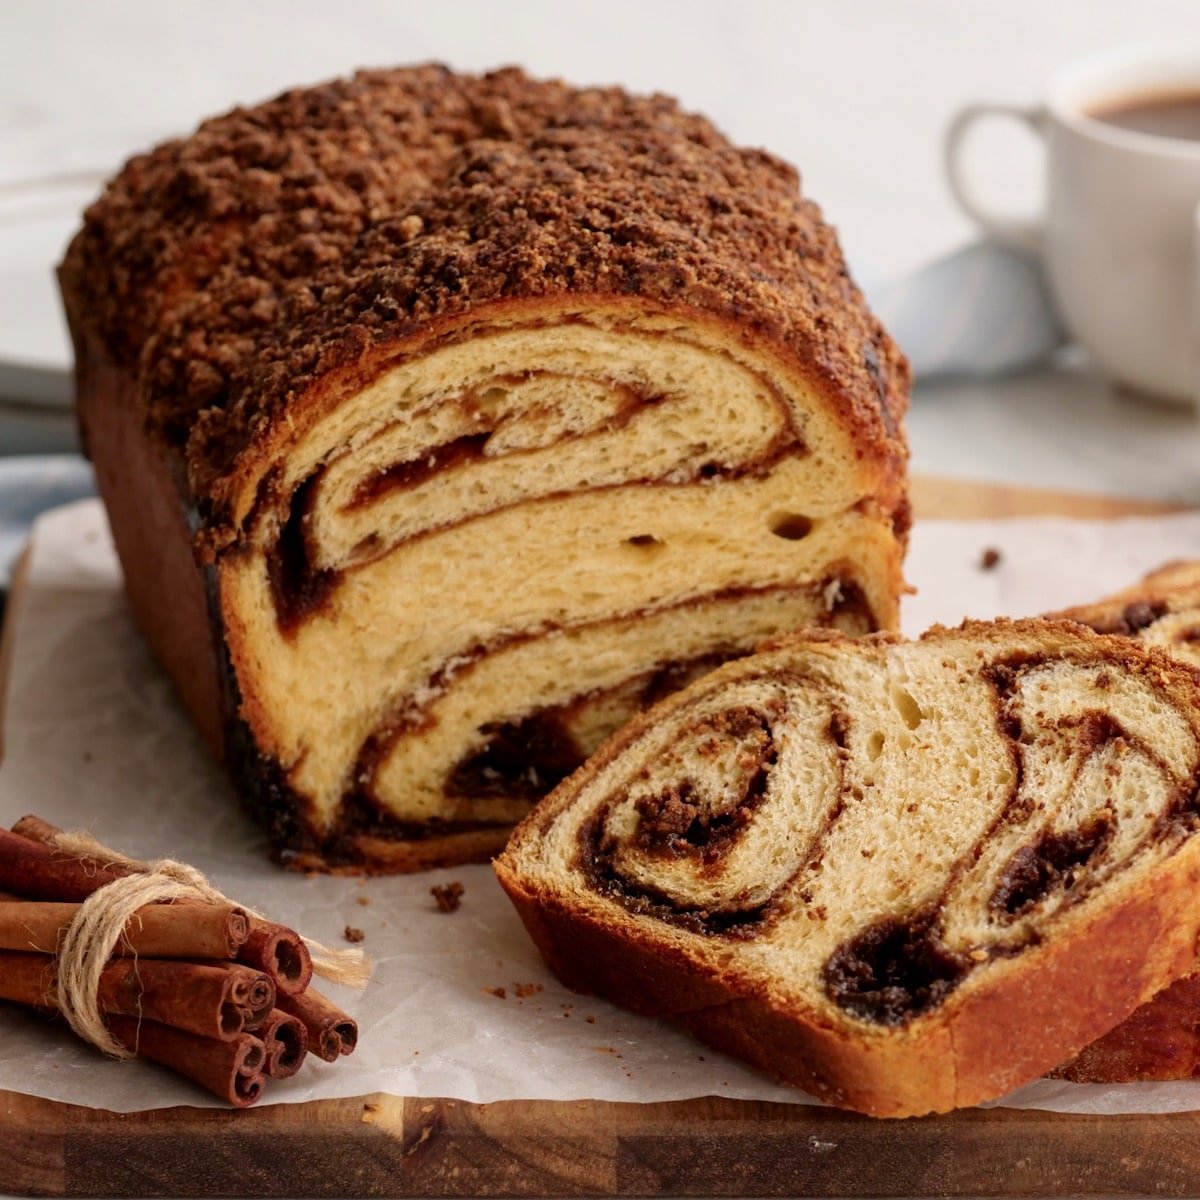 Featured - Cinnamon Babka sliced on cutting board with cinnamon stick bundle. coffee and towel in background.